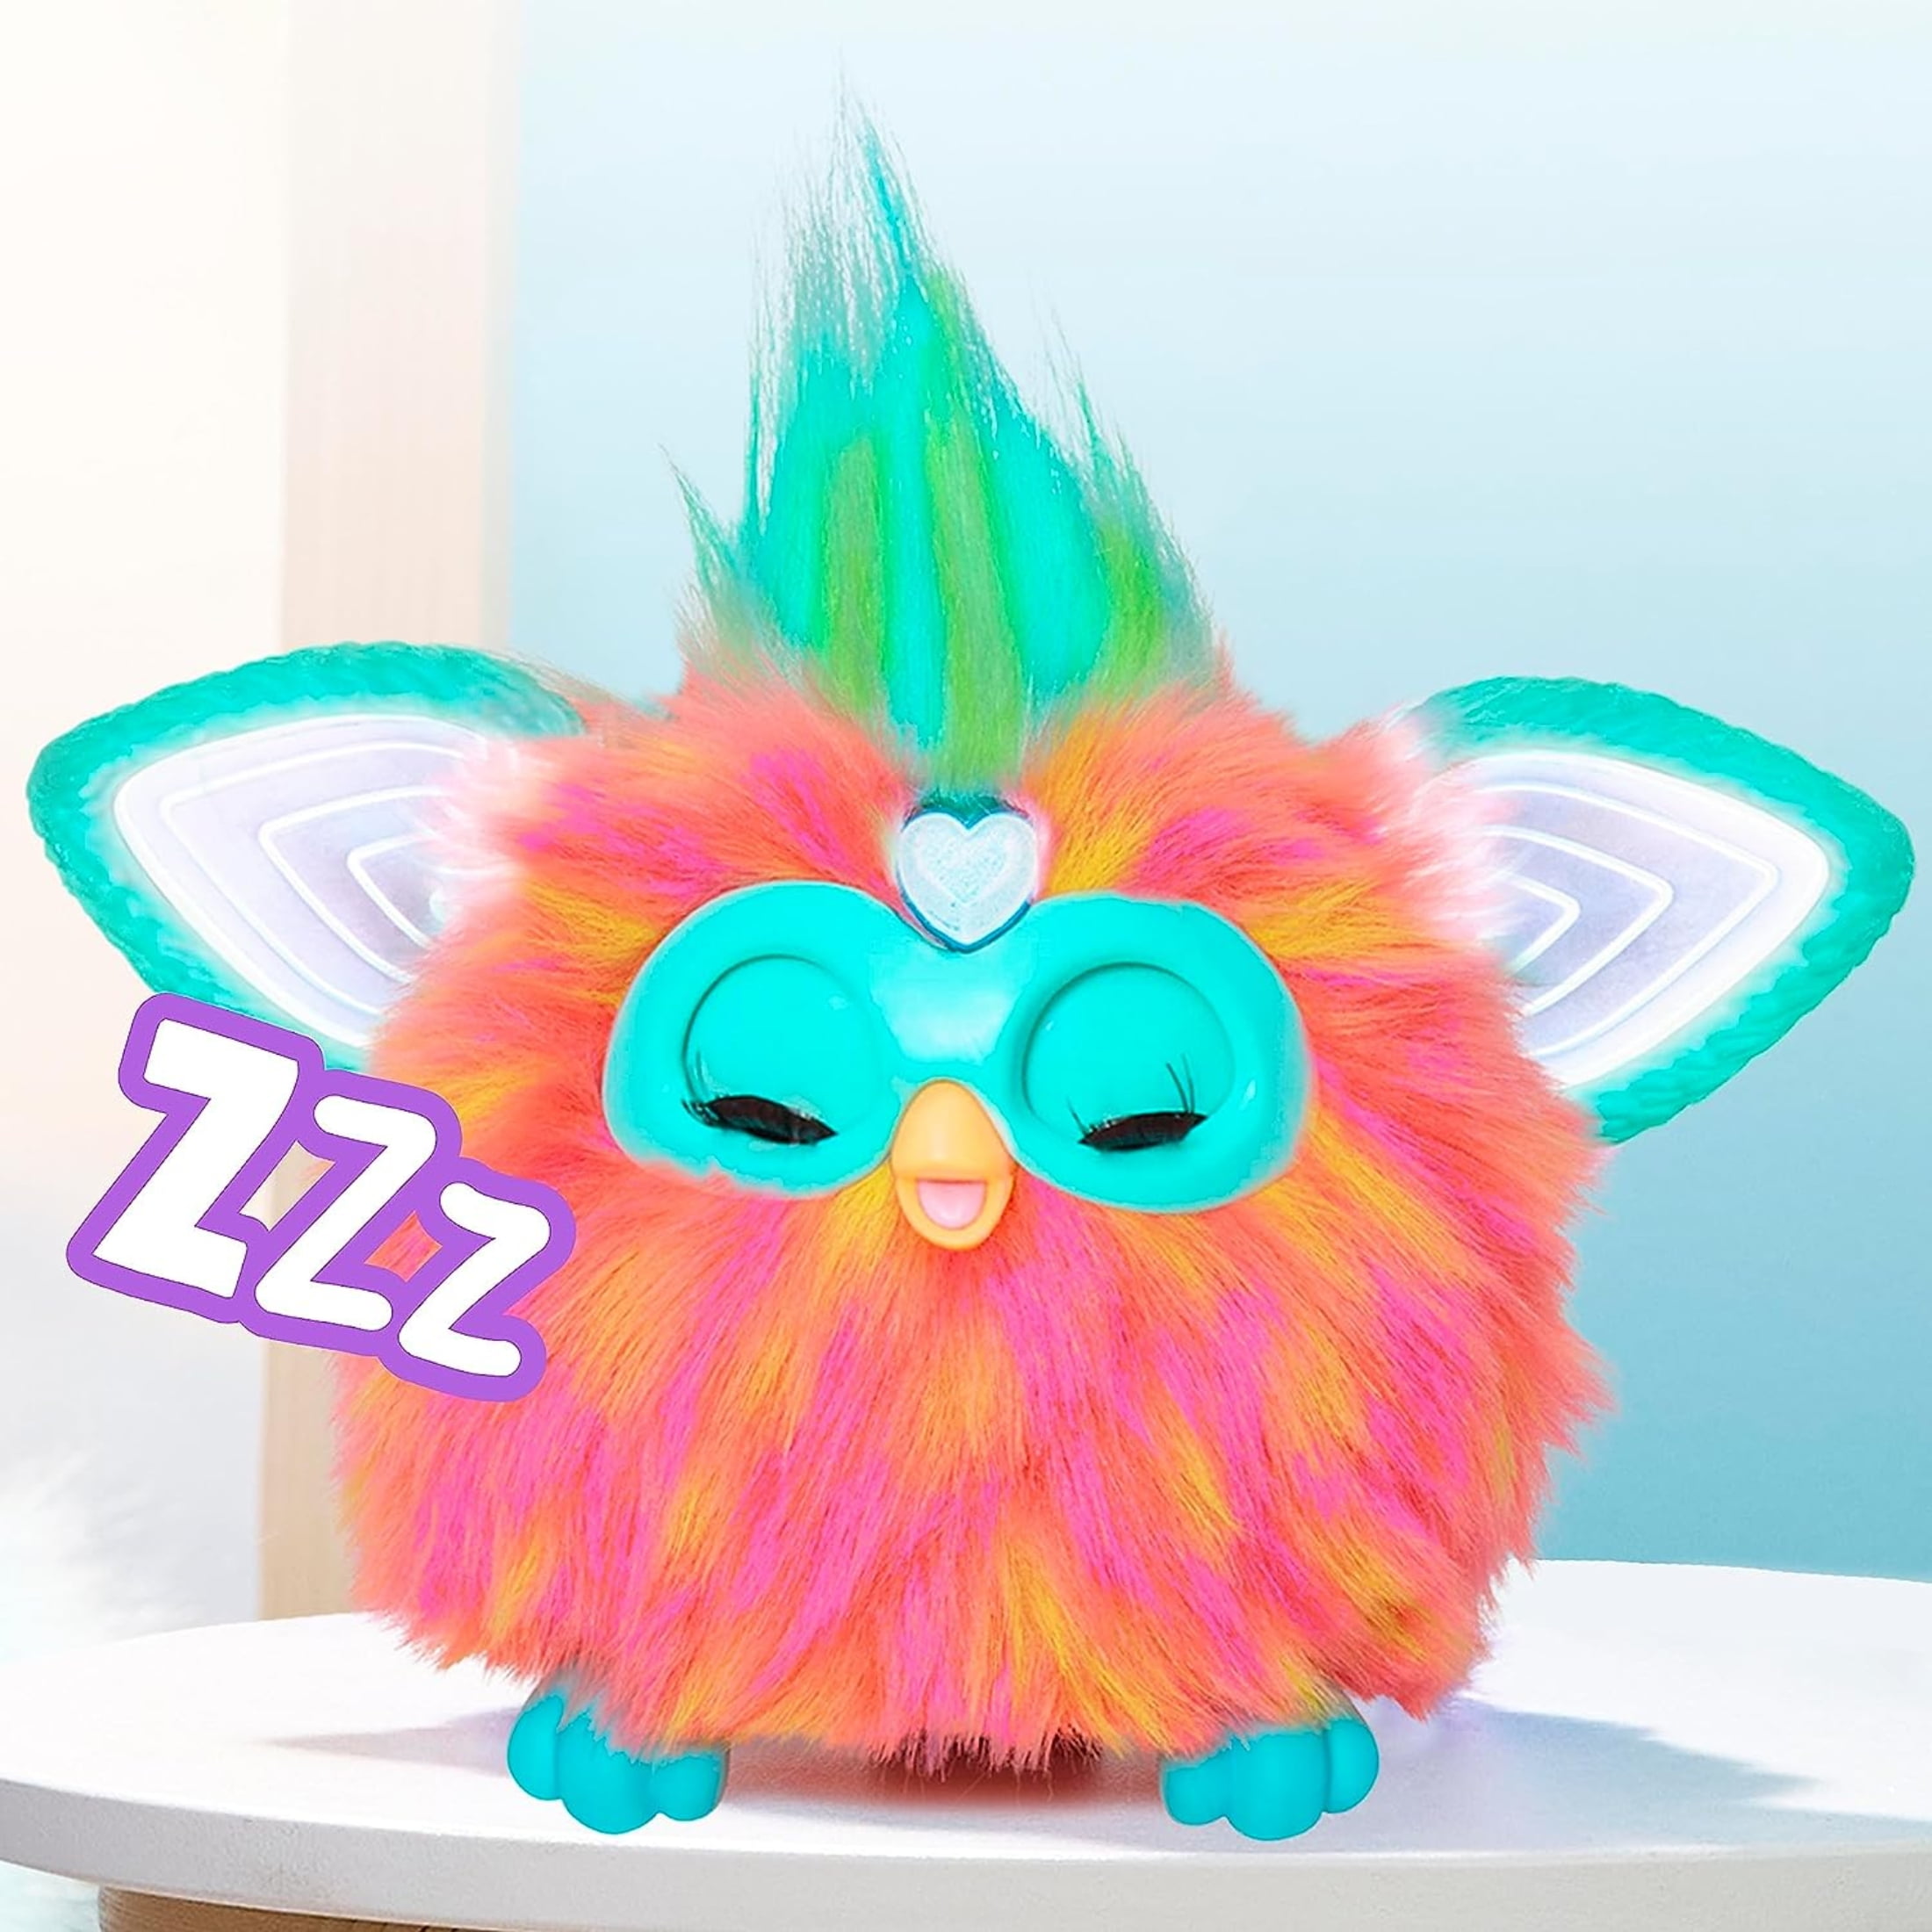 Furby Coral Interactive Plush Toy : Target